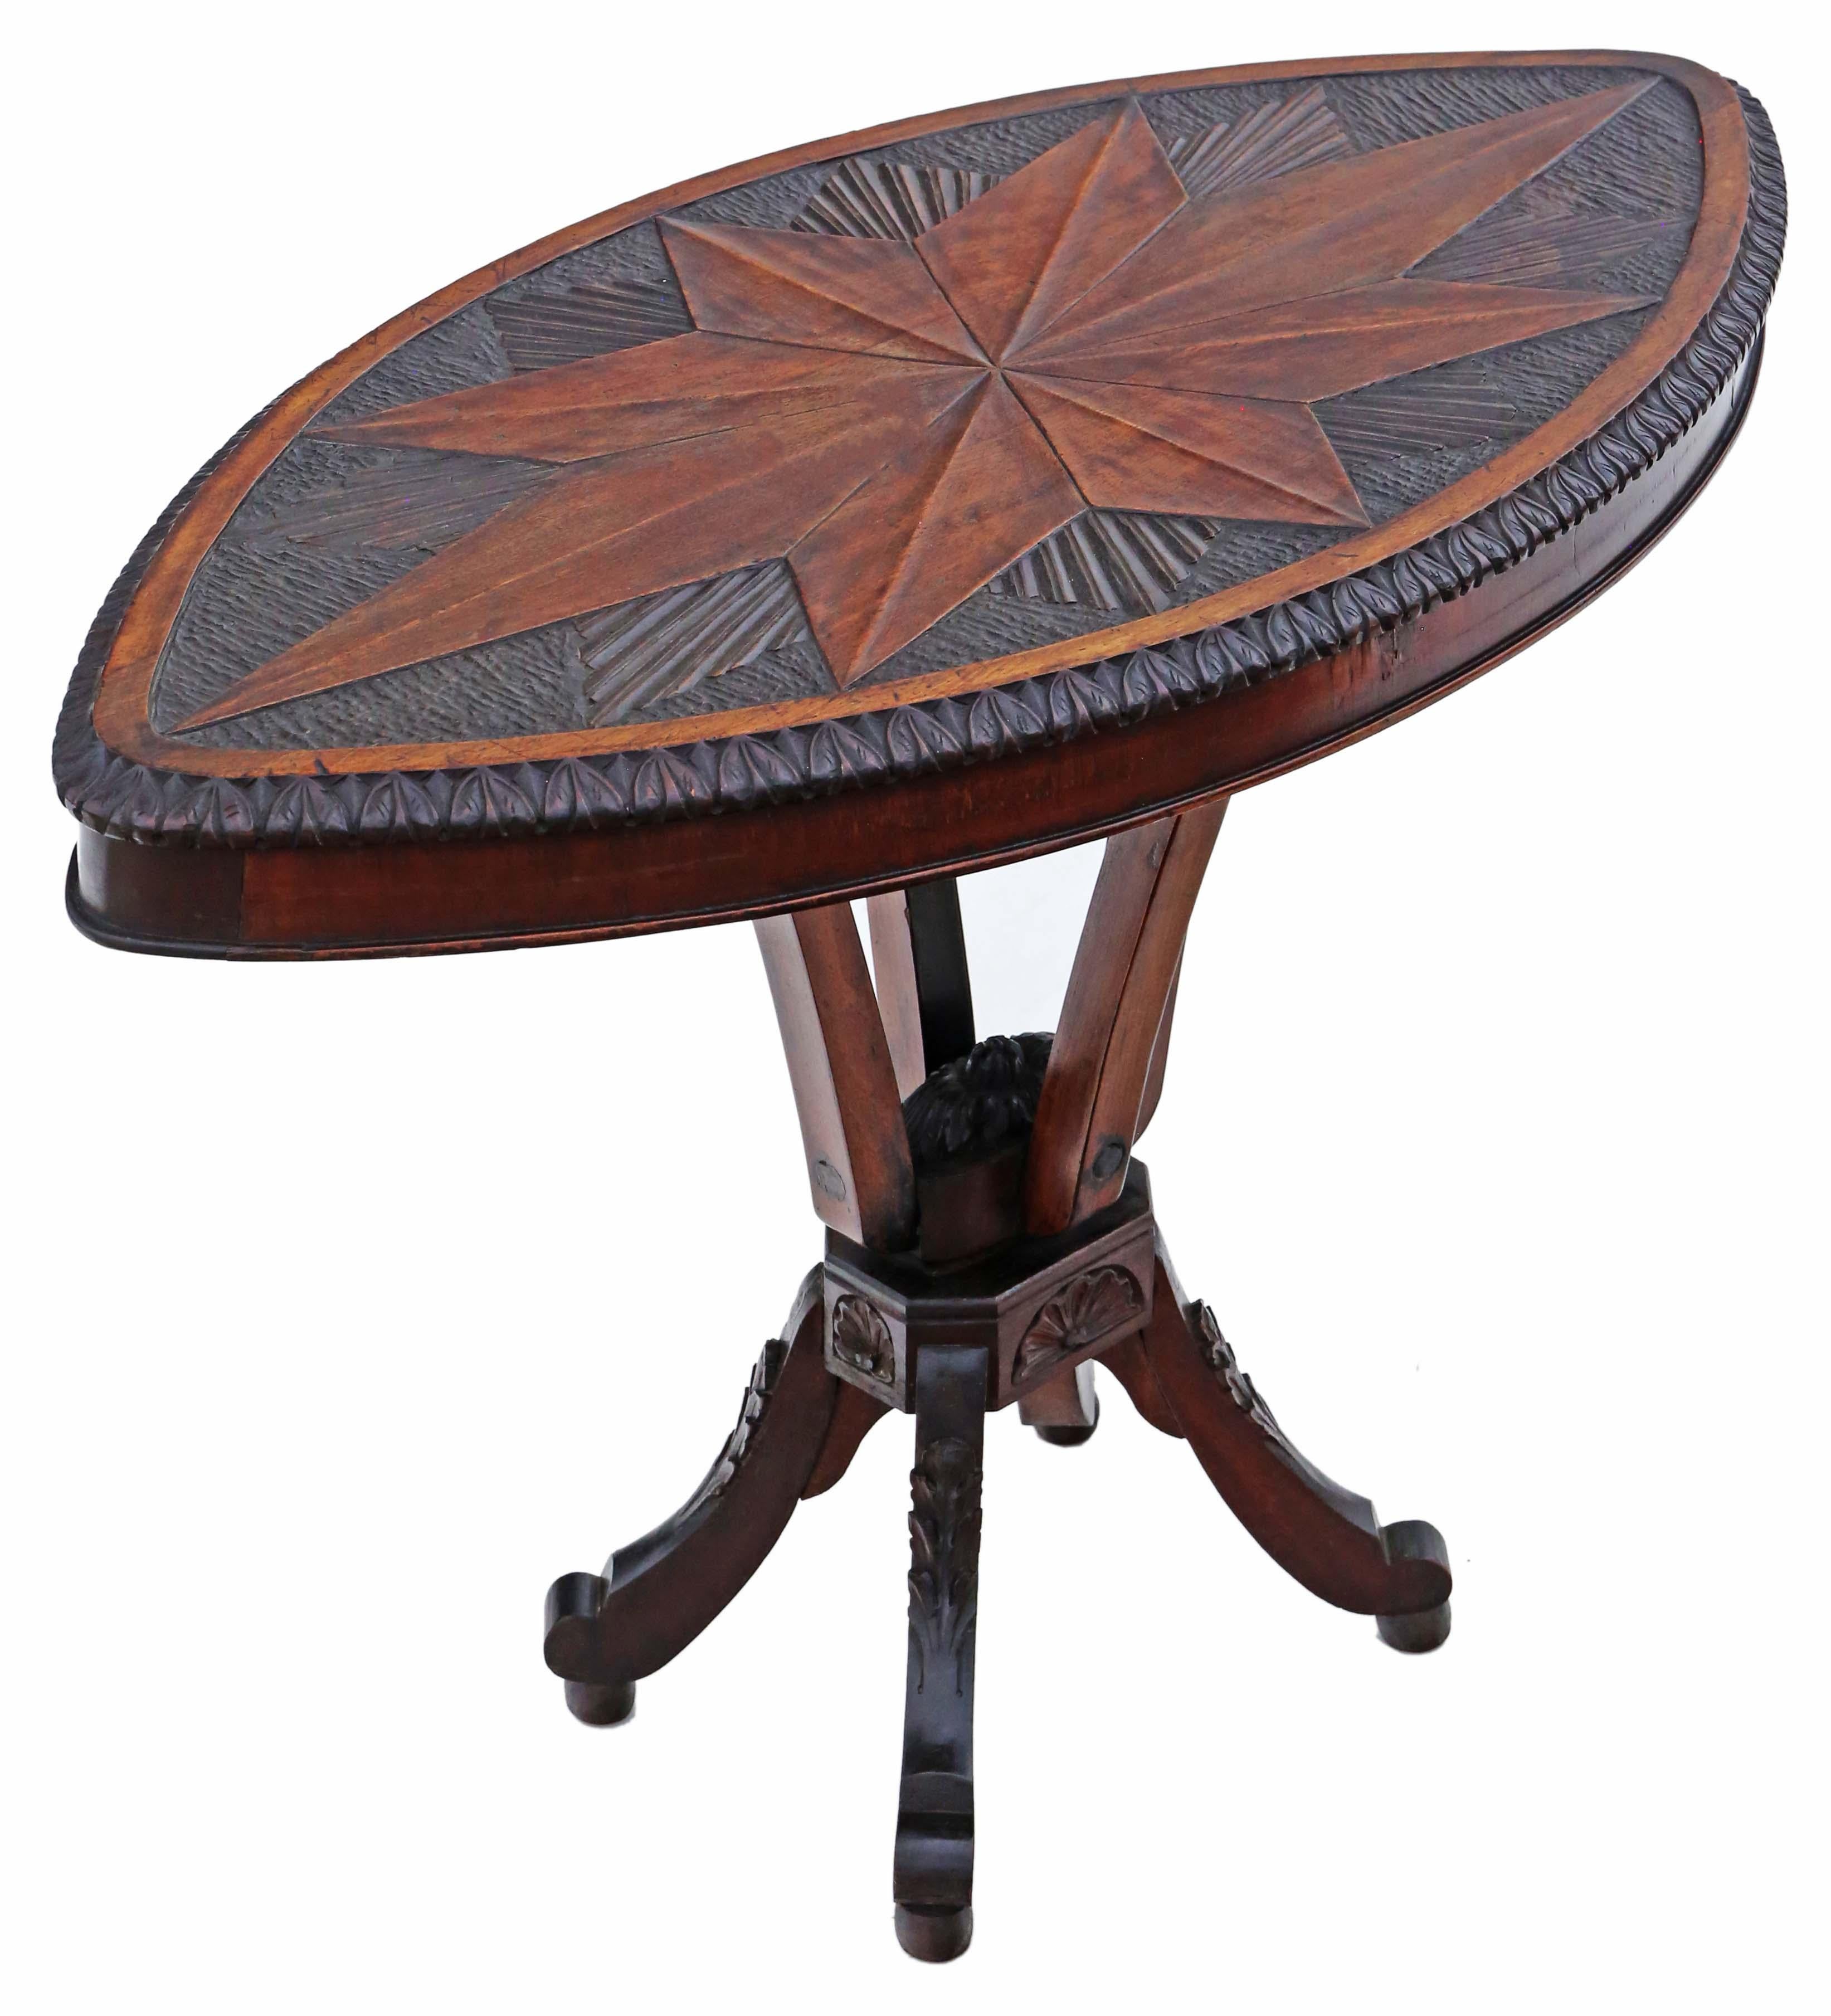 Antique 19th Century Anglo Indian shield shaped centre side occasional coffee table.

Solid with no loose joints. A charming table that is full of age and character with a really great look.

Good colour and patina. Made from Padauk, beech and